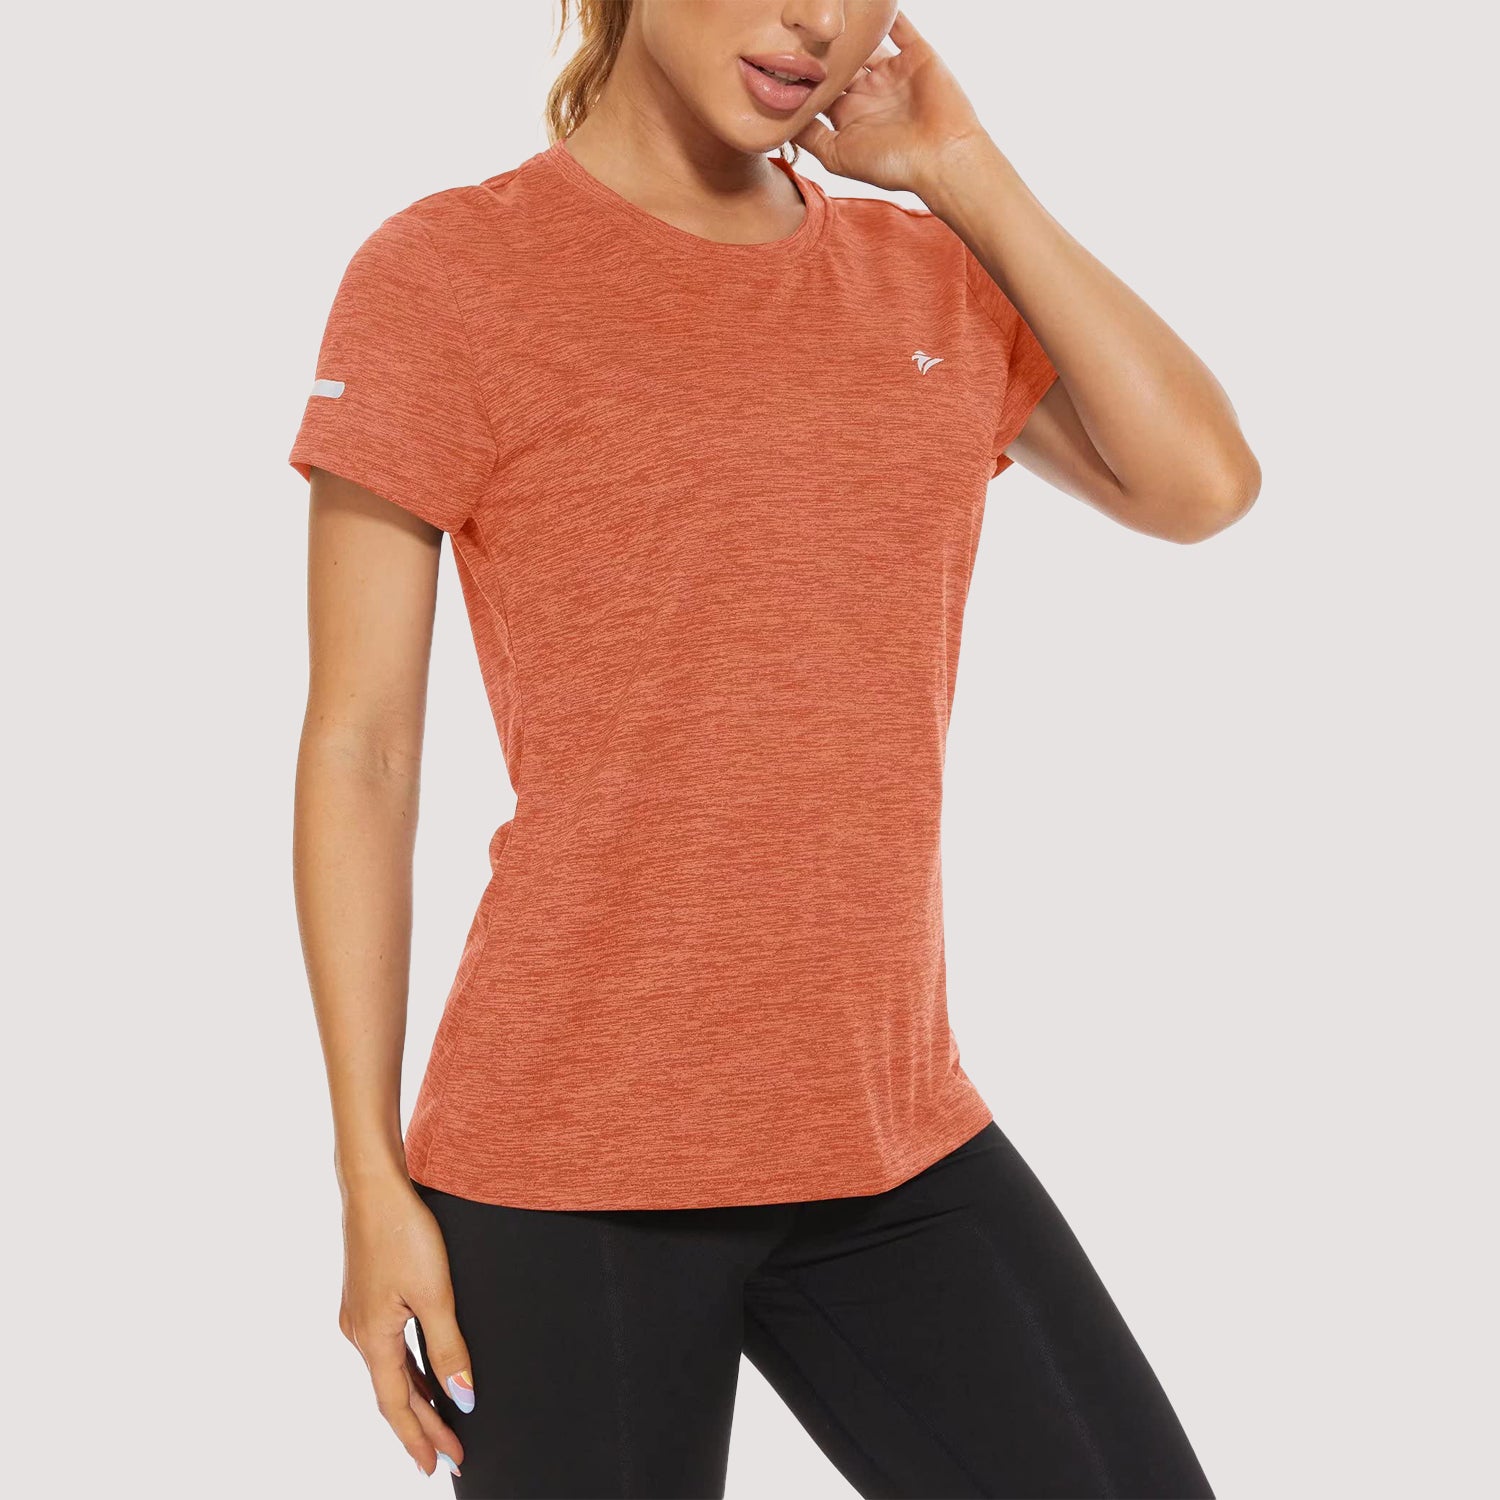 Women's Running T-Shirts Quick Dry with Reflective Strips Tee Shirts